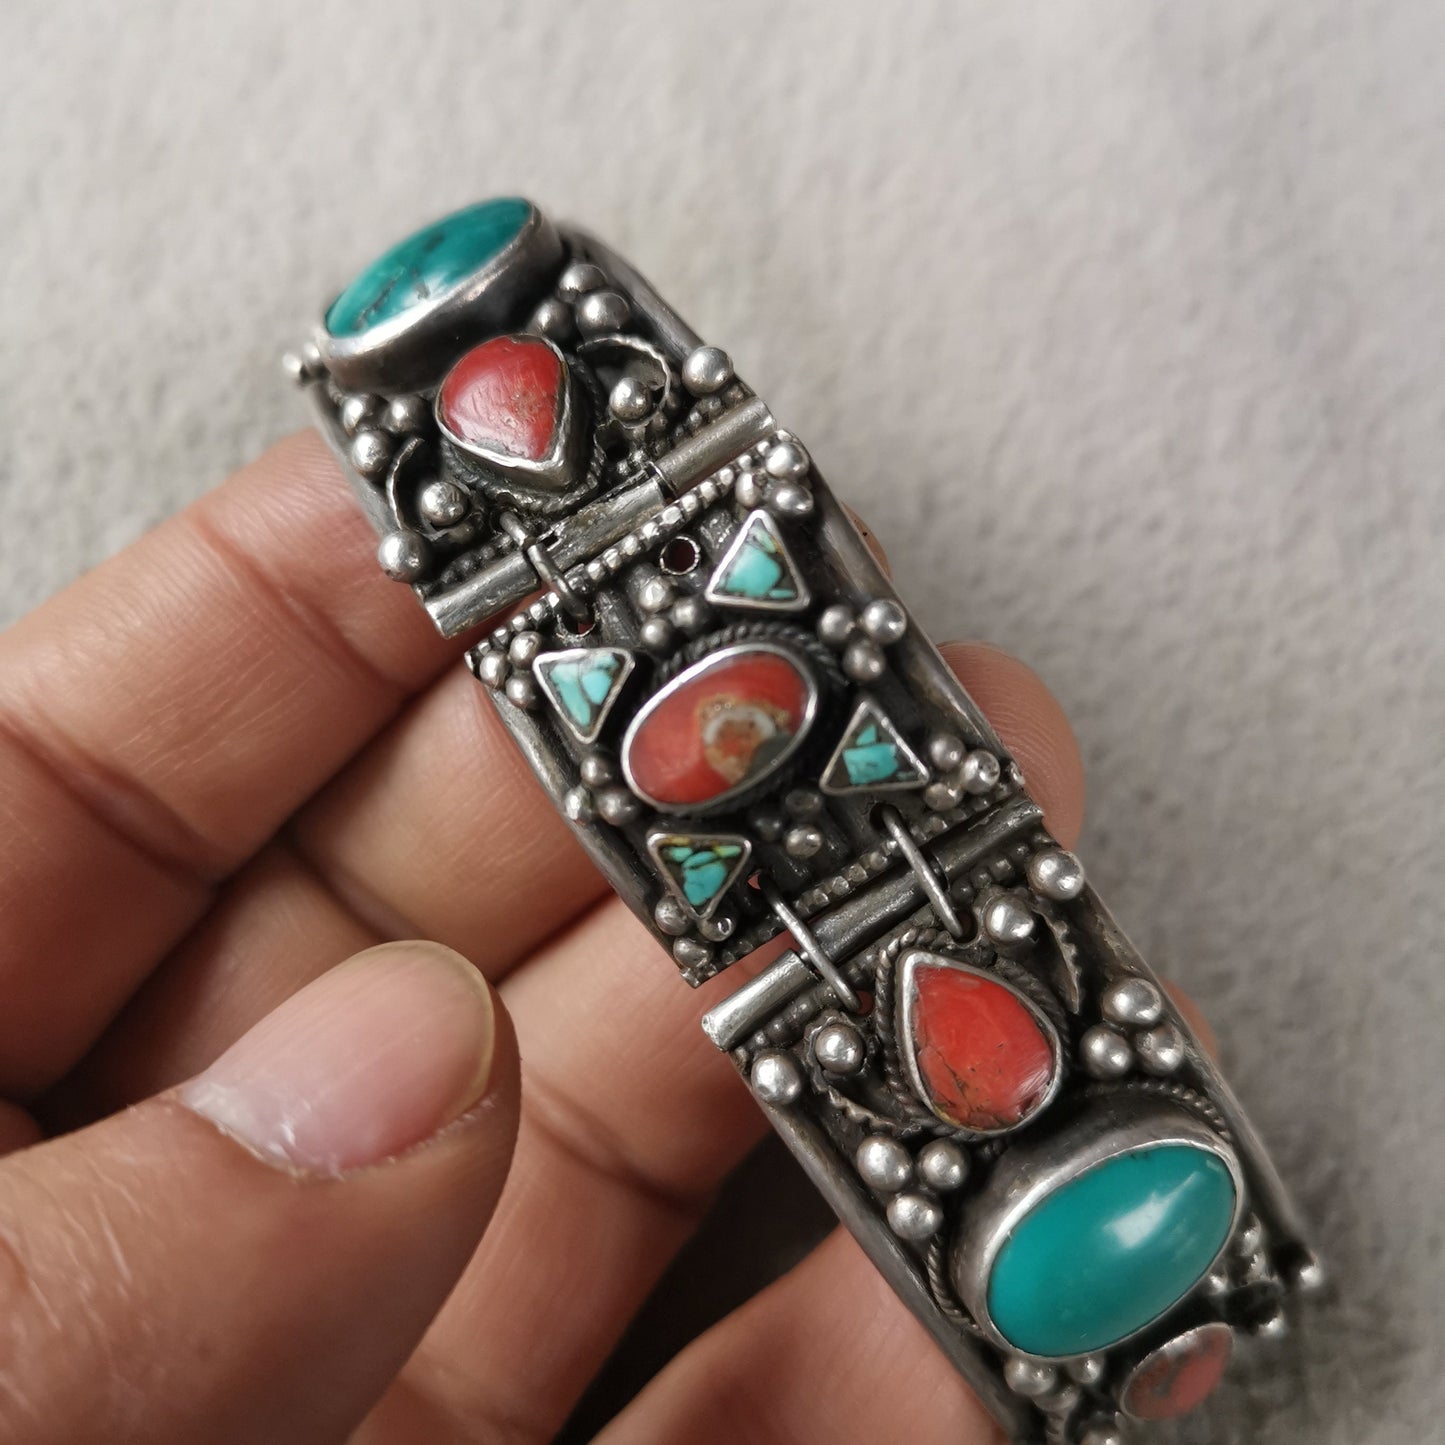 Gandhanra Handmade Antique Silver Bracelet inlaid with Turquoise and Red Coral,Collected from Tibet